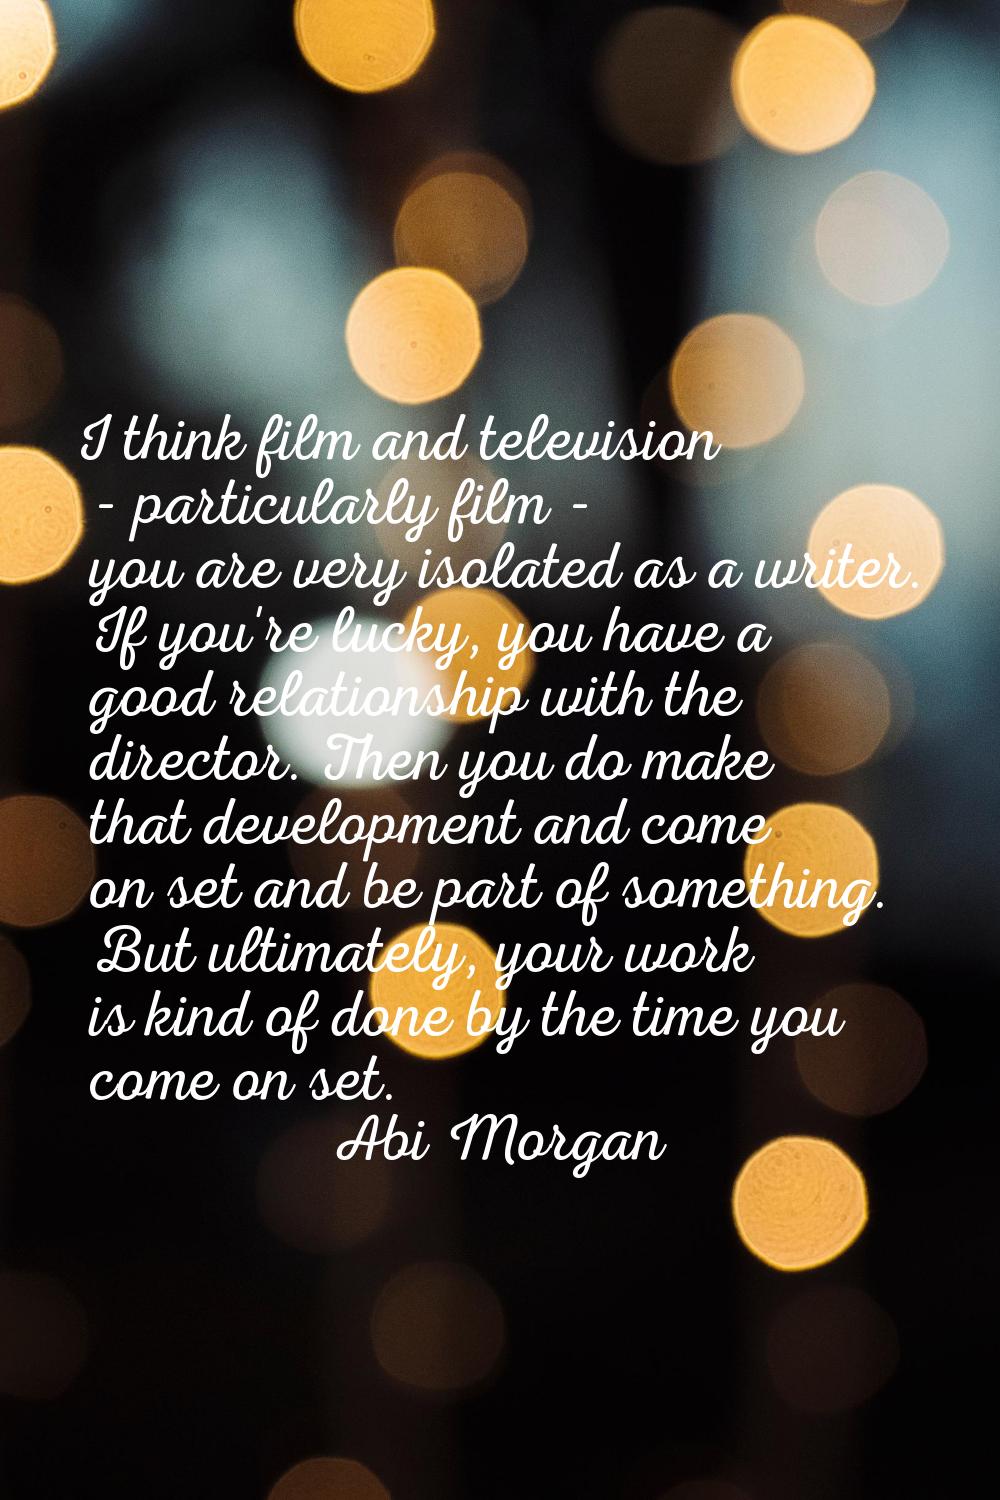 I think film and television - particularly film - you are very isolated as a writer. If you're luck